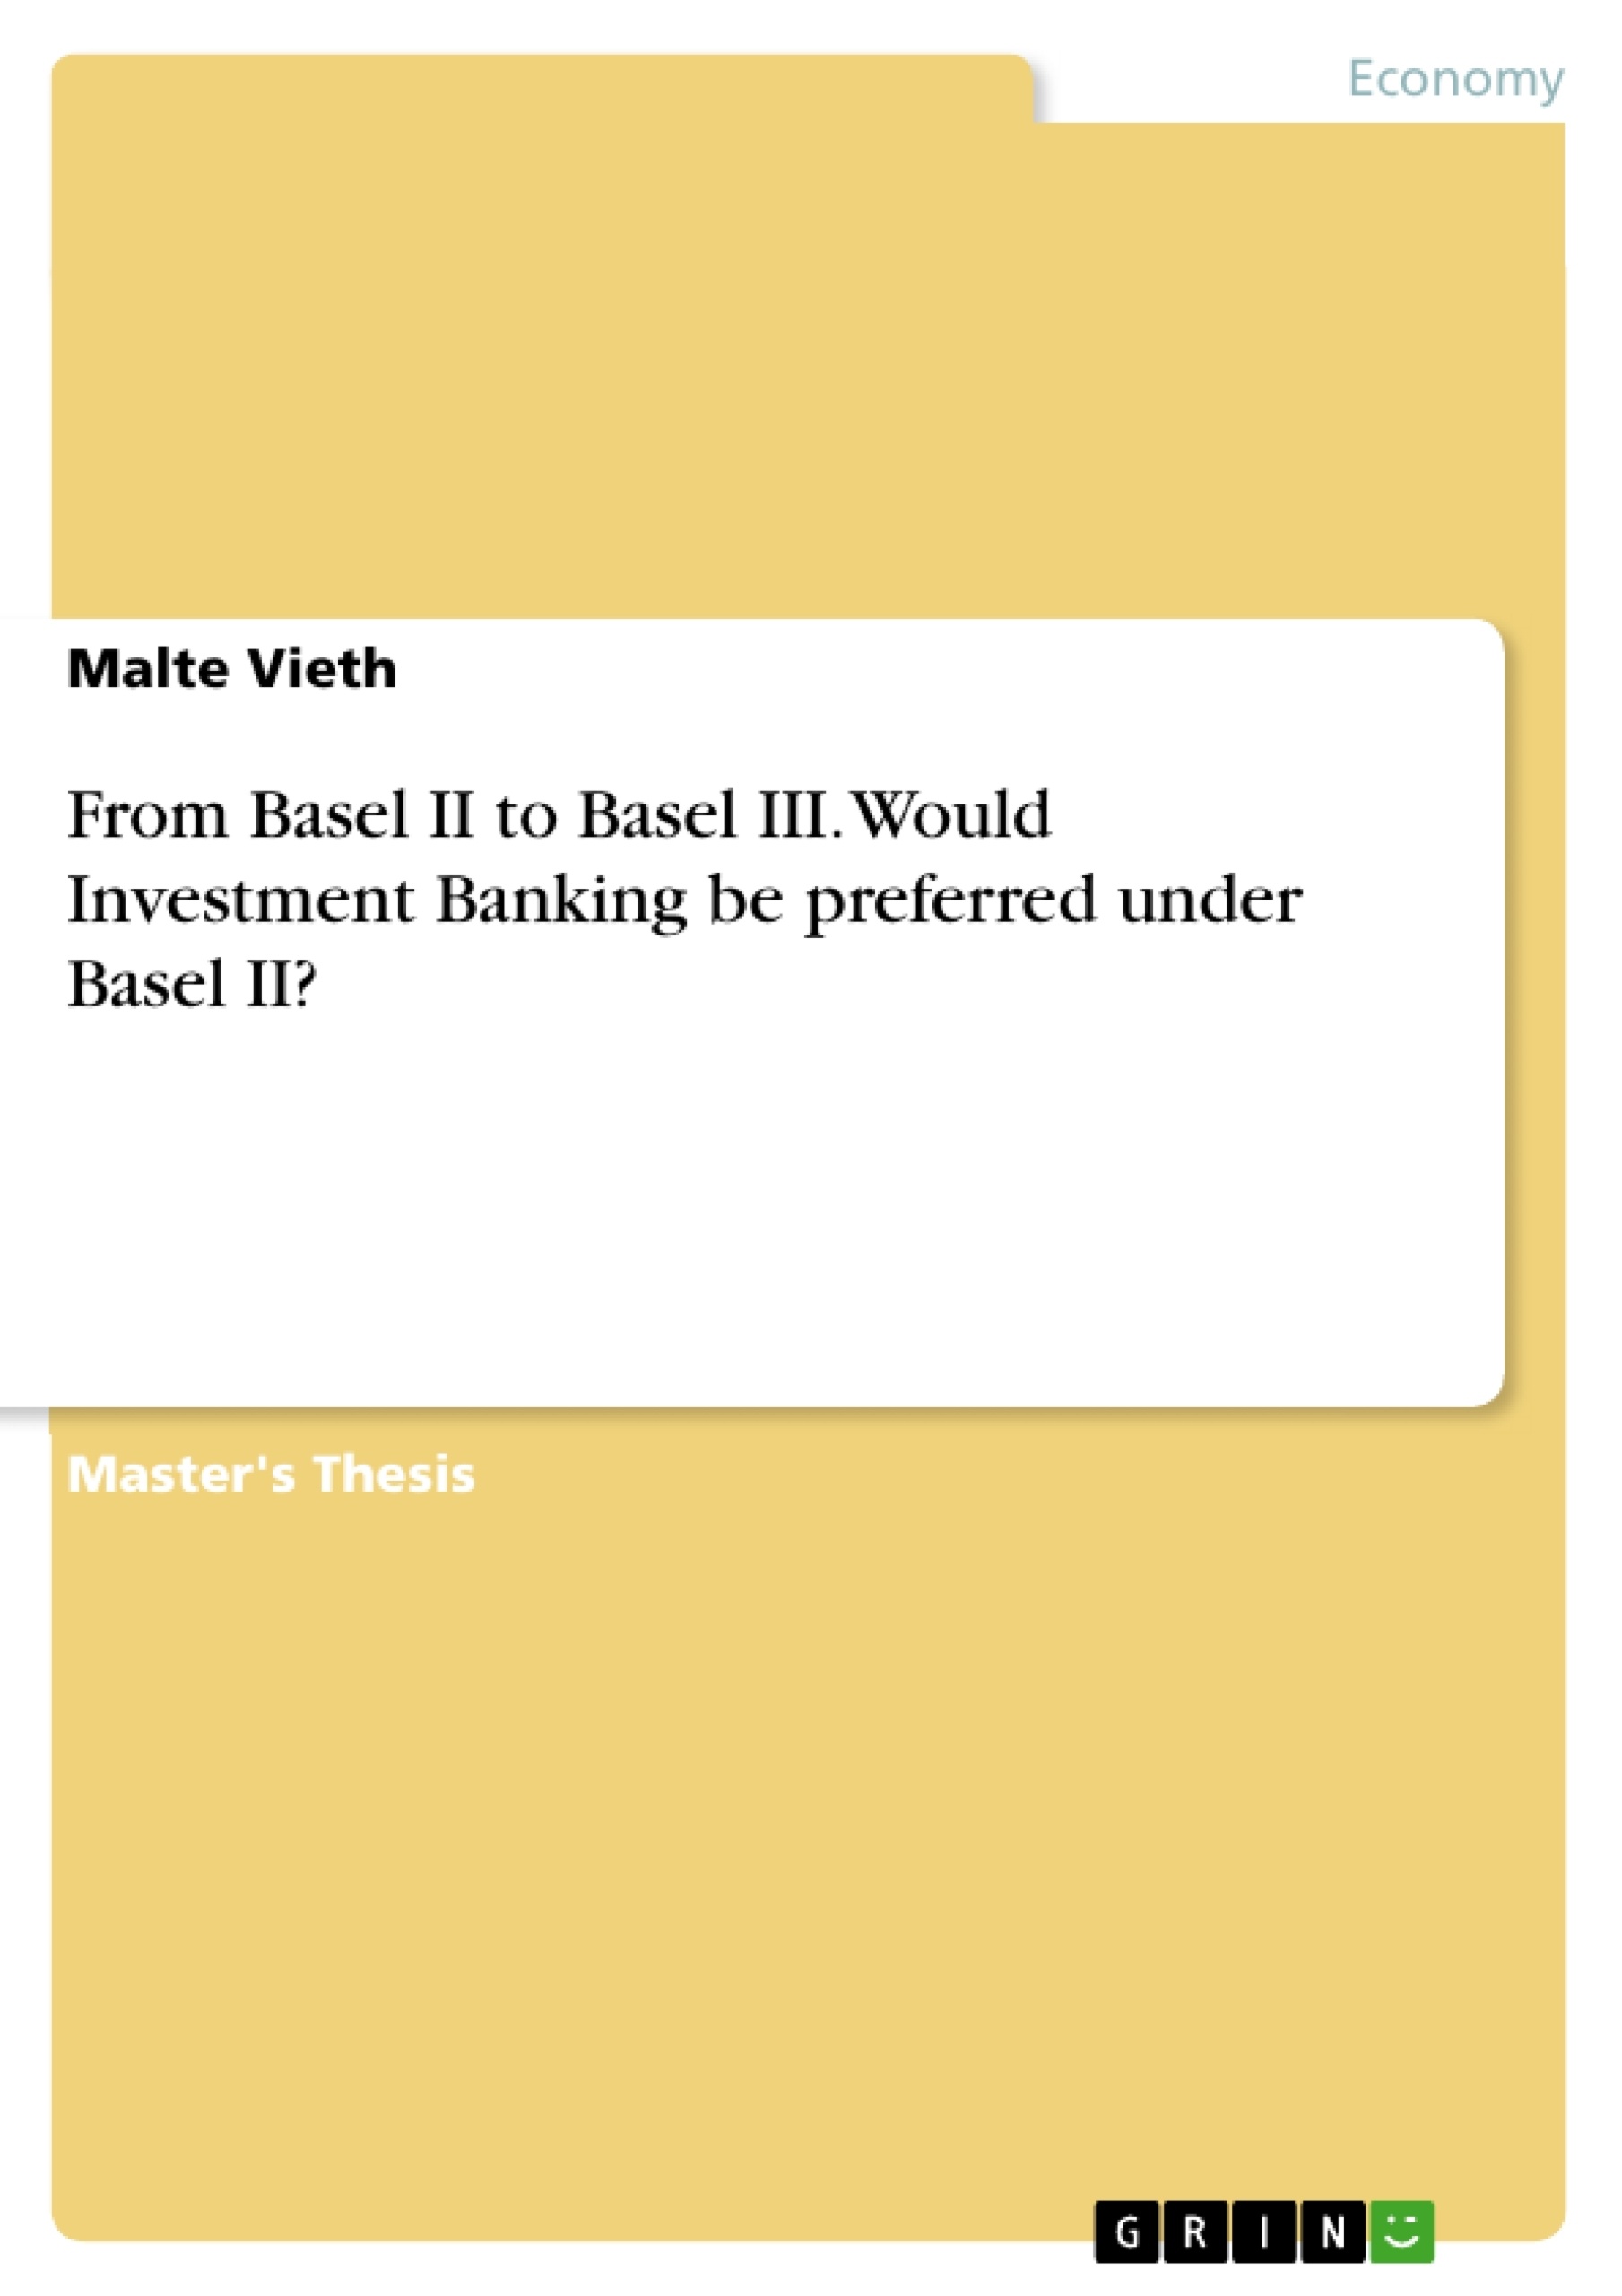 Titre: From Basel II to Basel III. Would Investment Banking be preferred under Basel II?